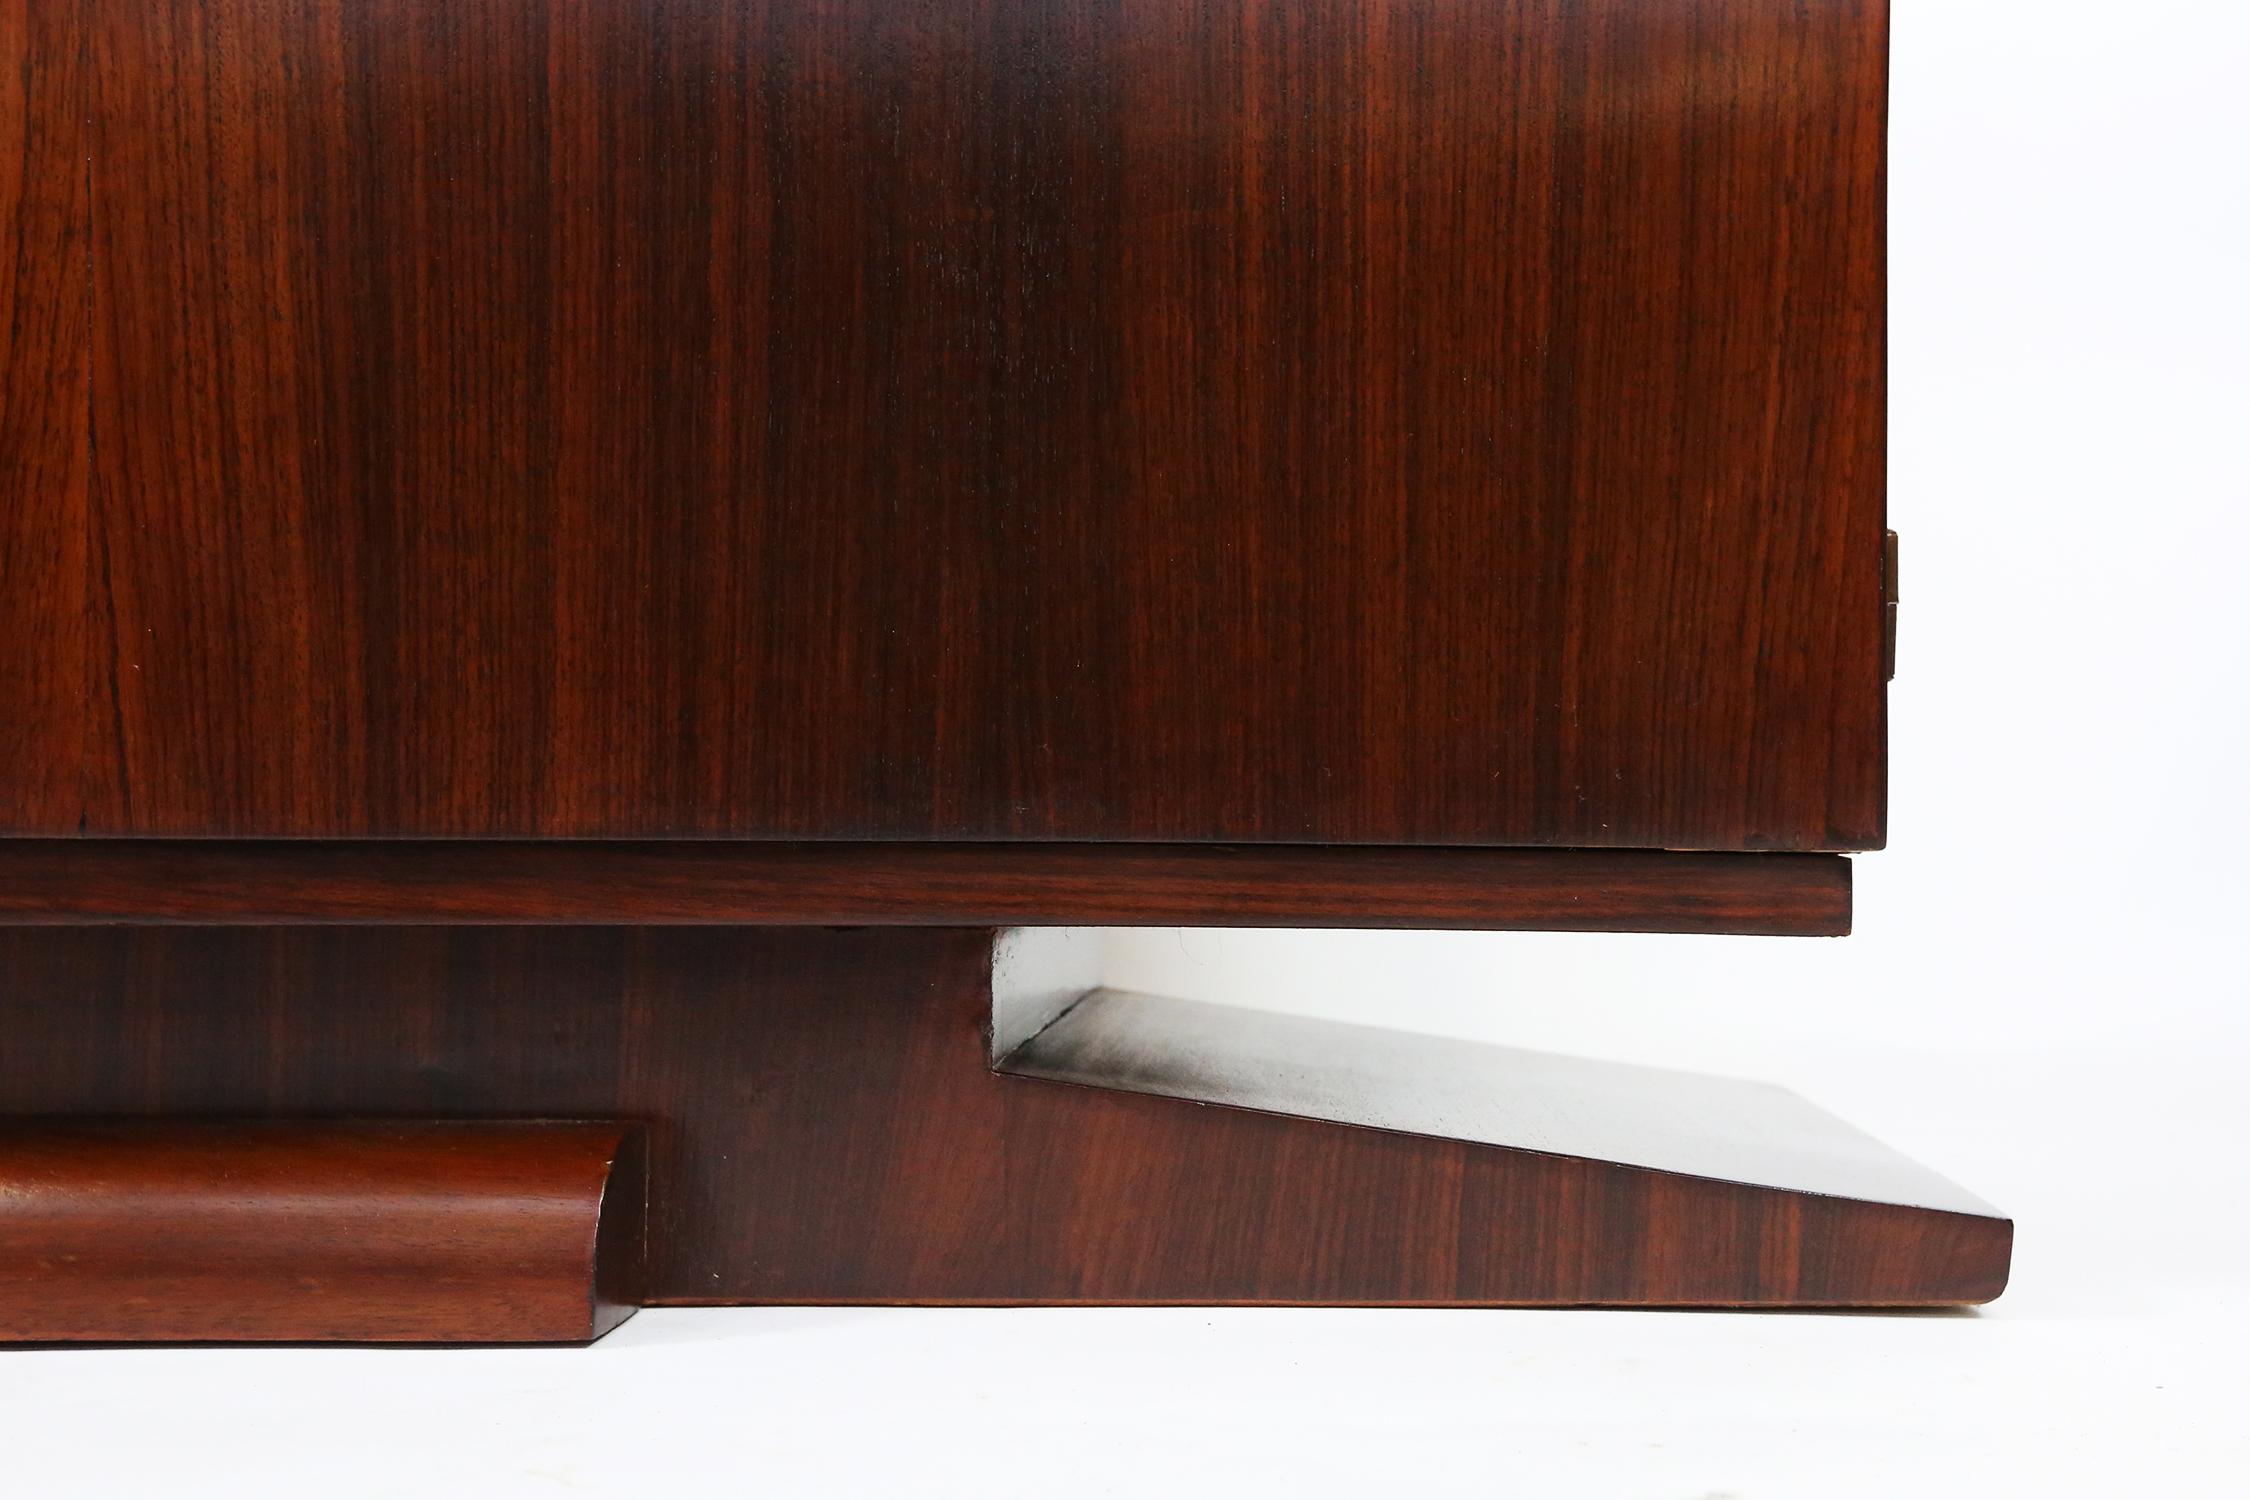 Art-Deco Walnut and Black Marble Sideboard from De Coene Frères, Belgium 1930s For Sale 2